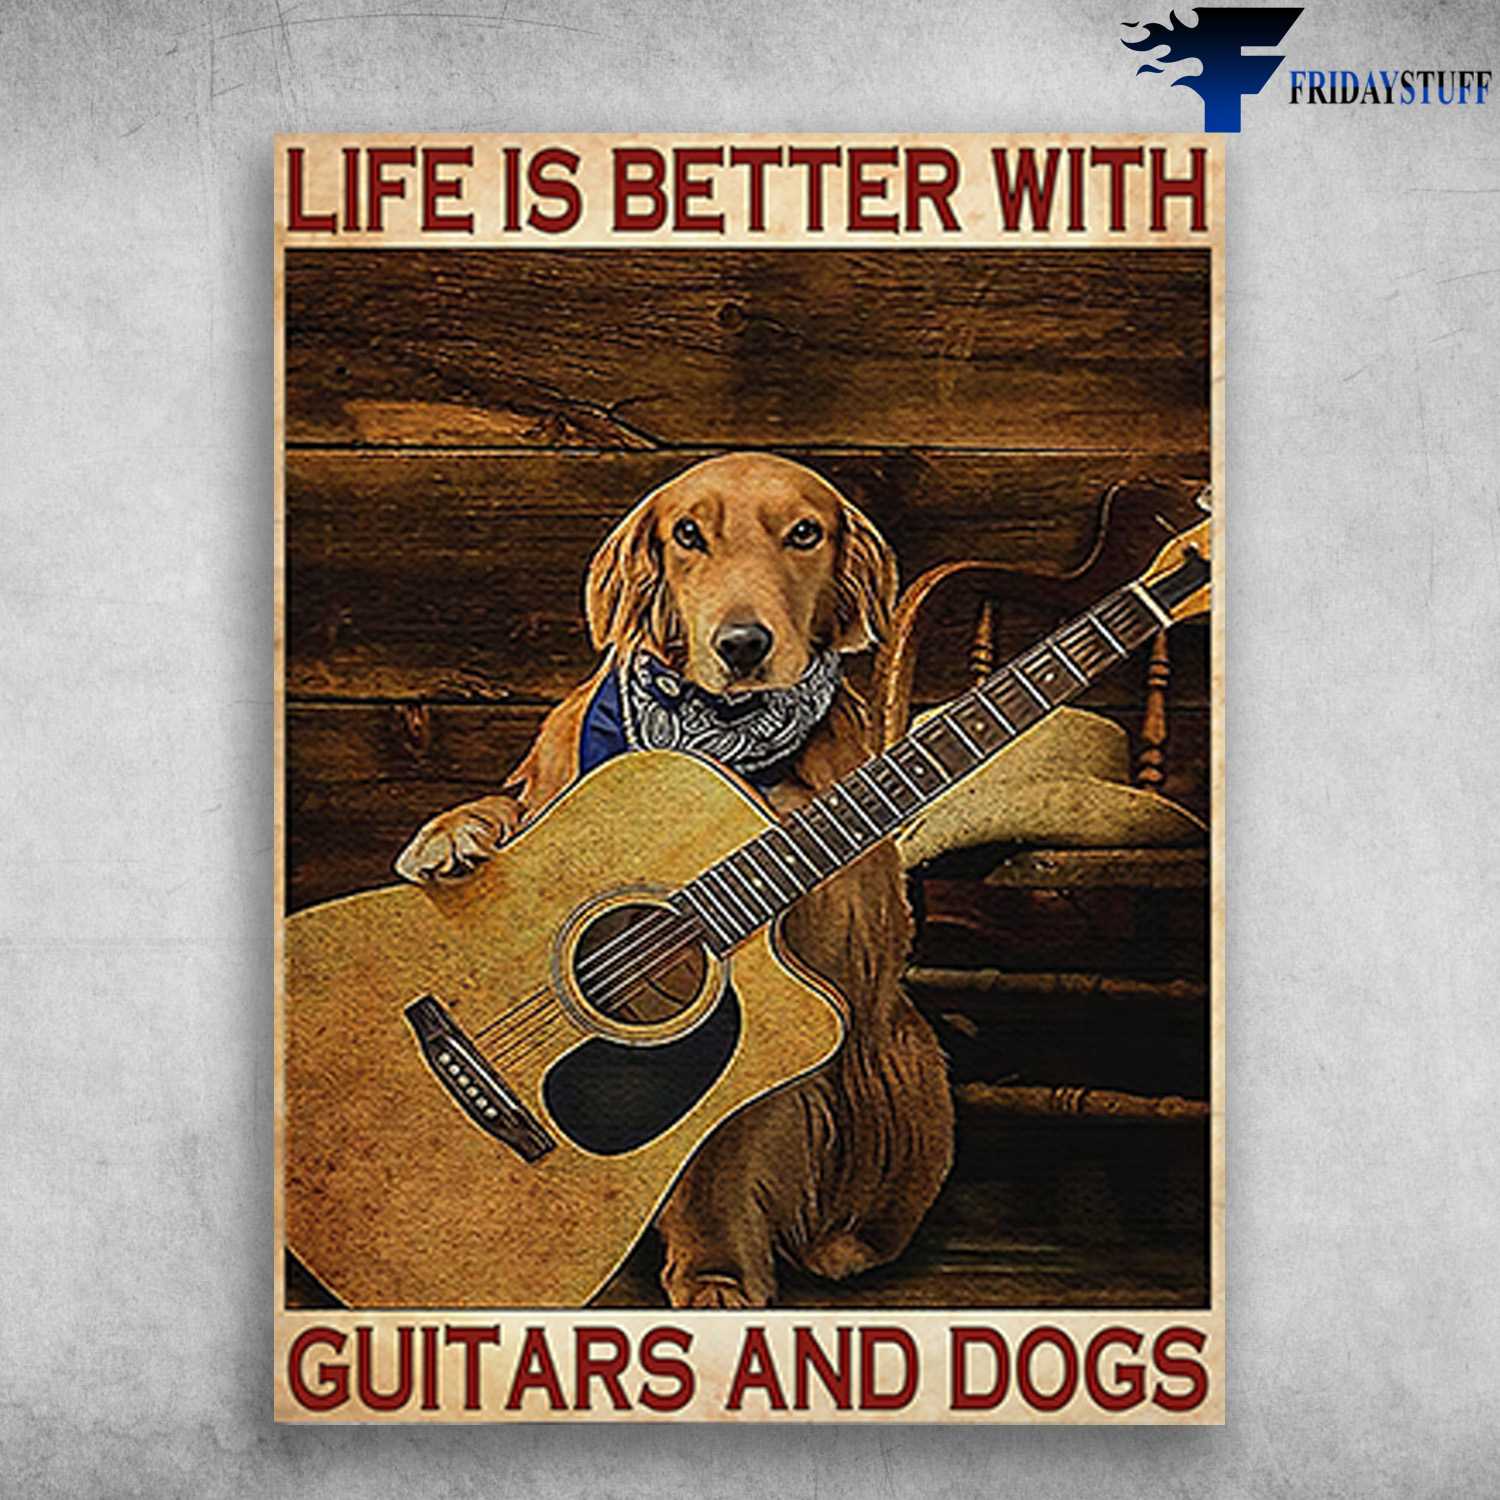 Golden Retriver, God And Guitar - Life Is Better With, Guitars And Dogs